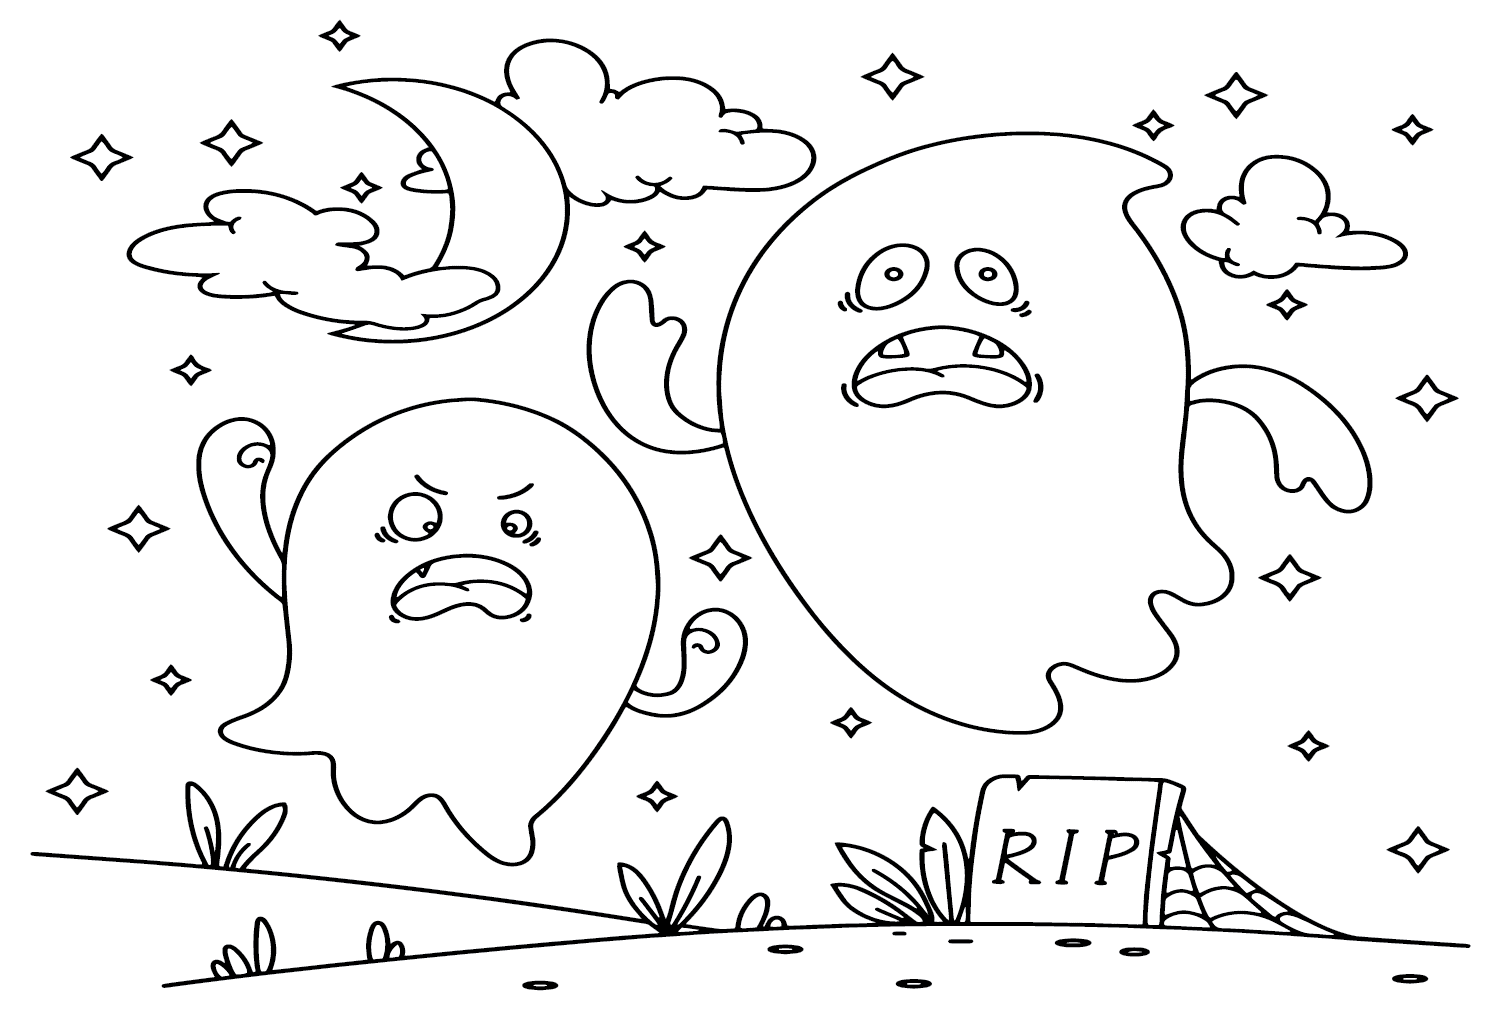 Ghost Coloring Page for Adults